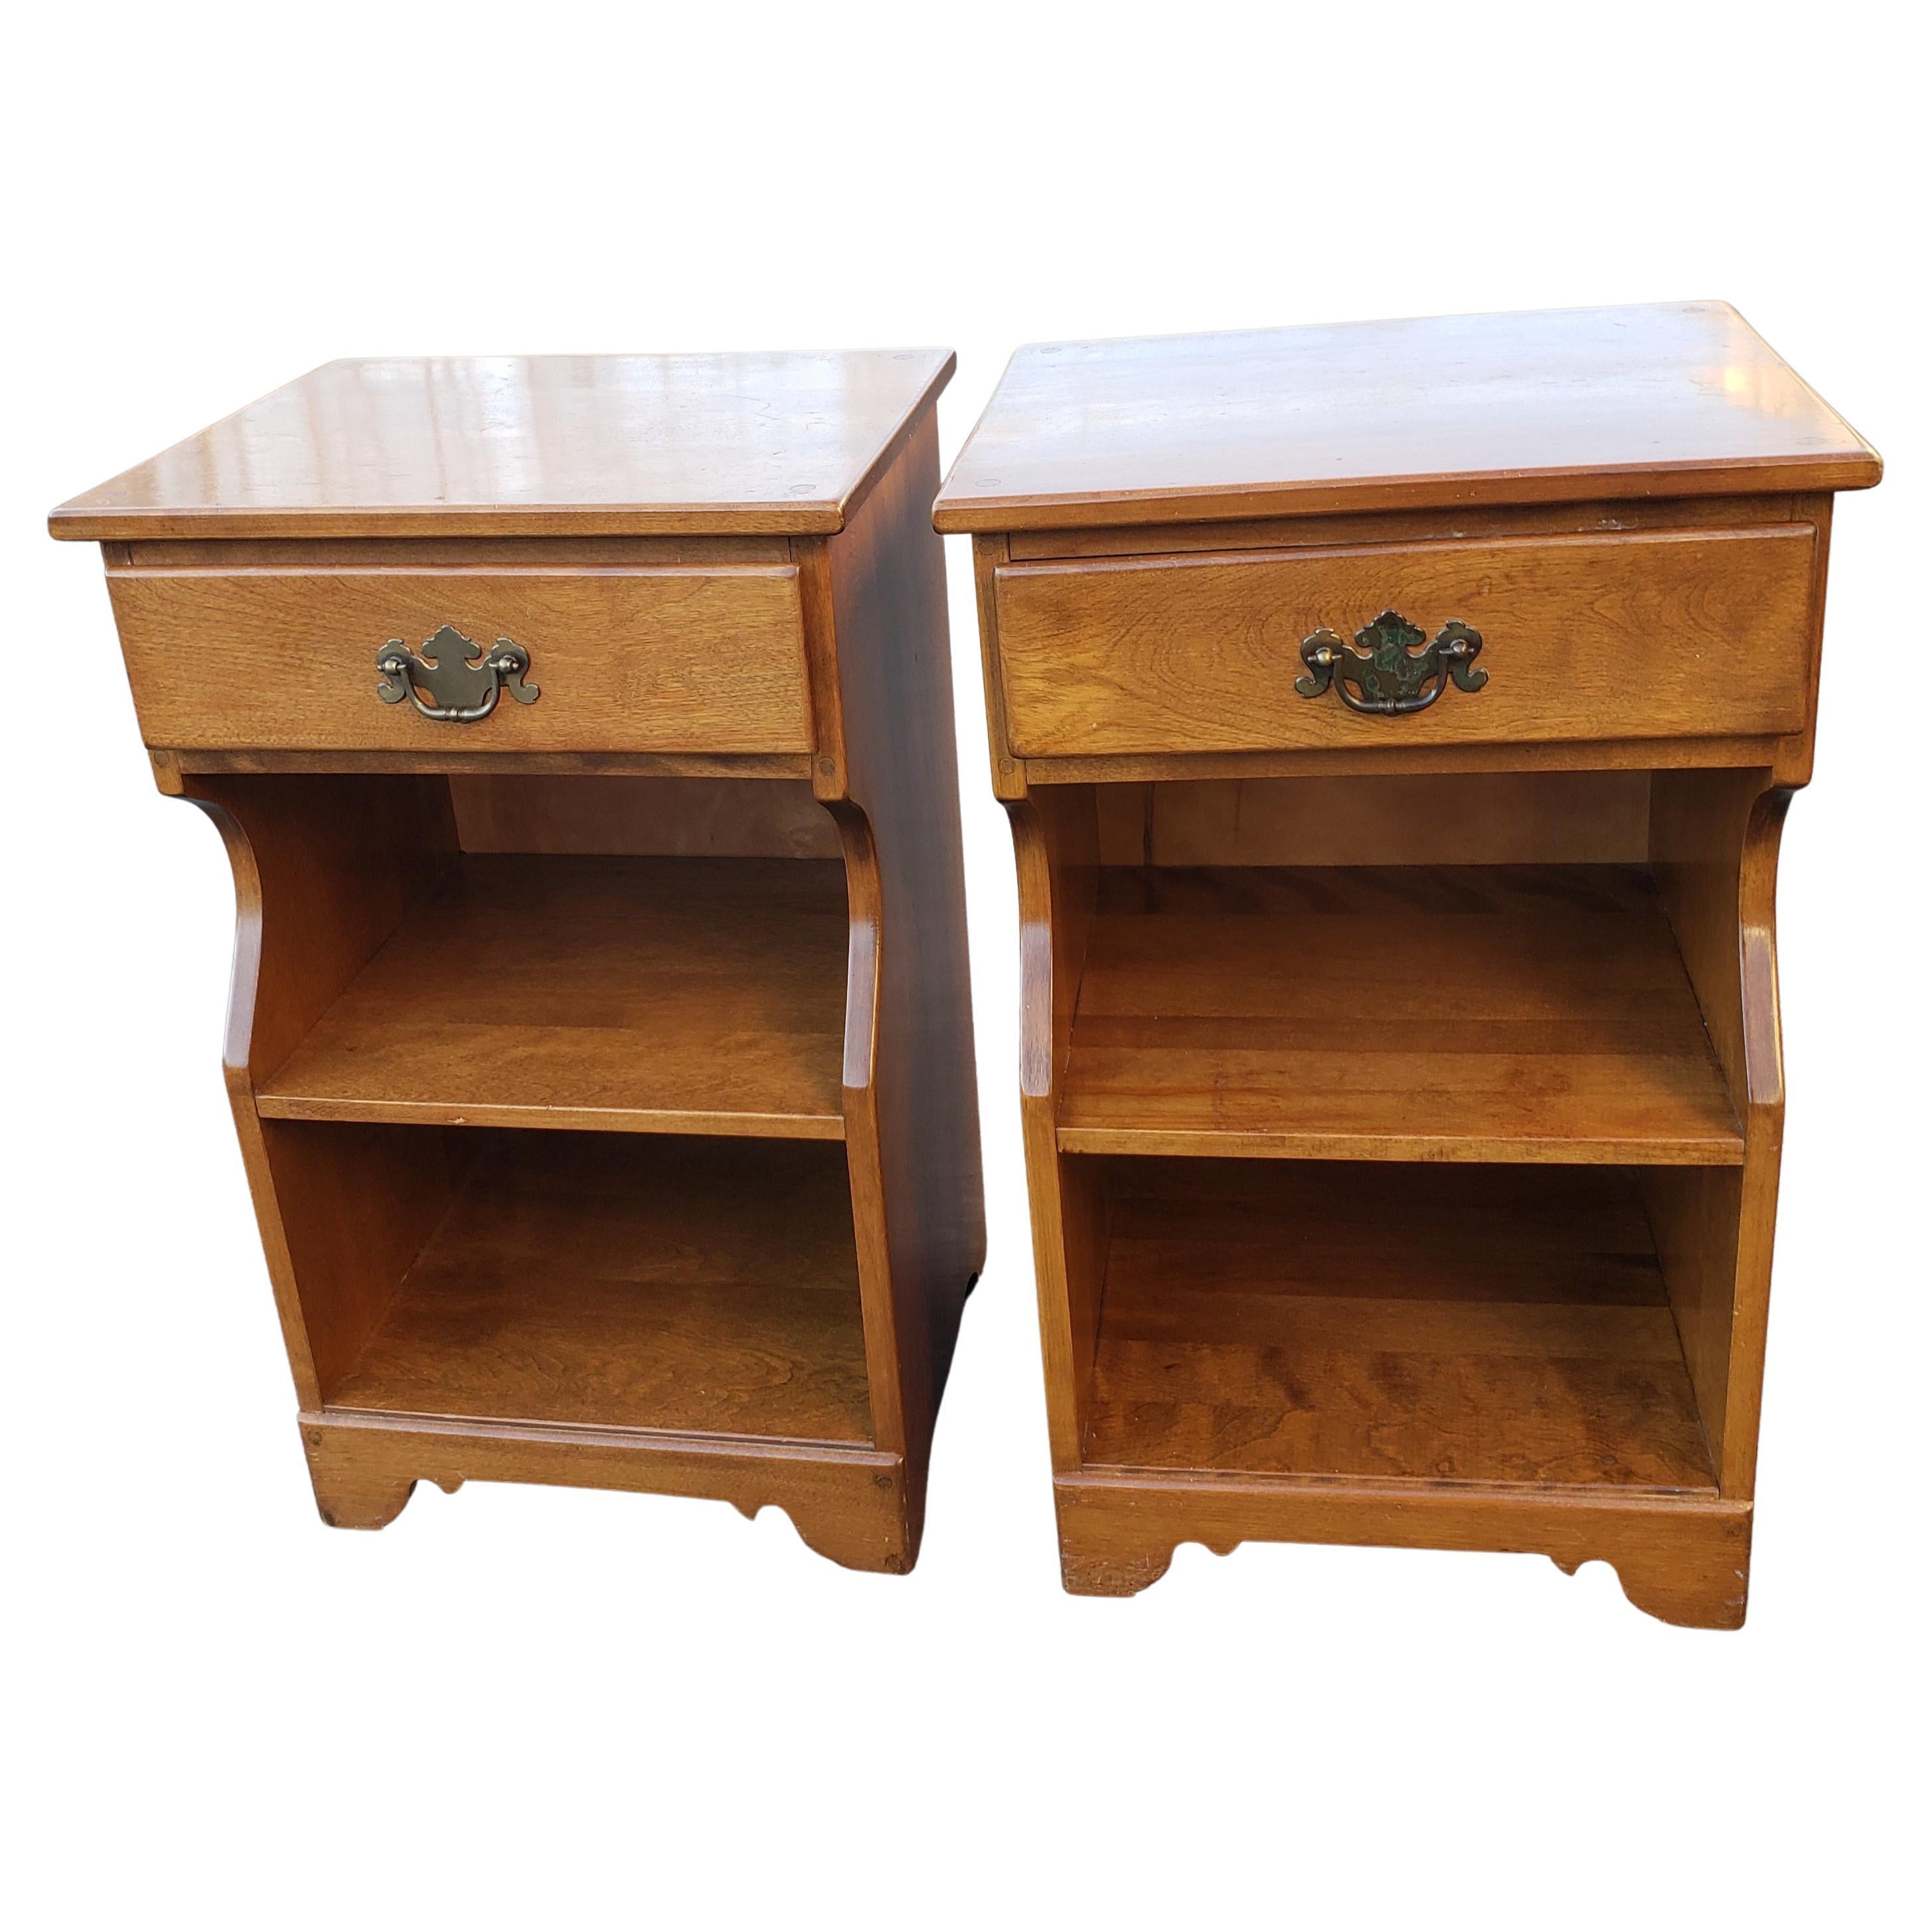 Ethan Allen by Baumritter 3 Tier Maple W. Drawer Nightstands, C. 1960s, a Pair